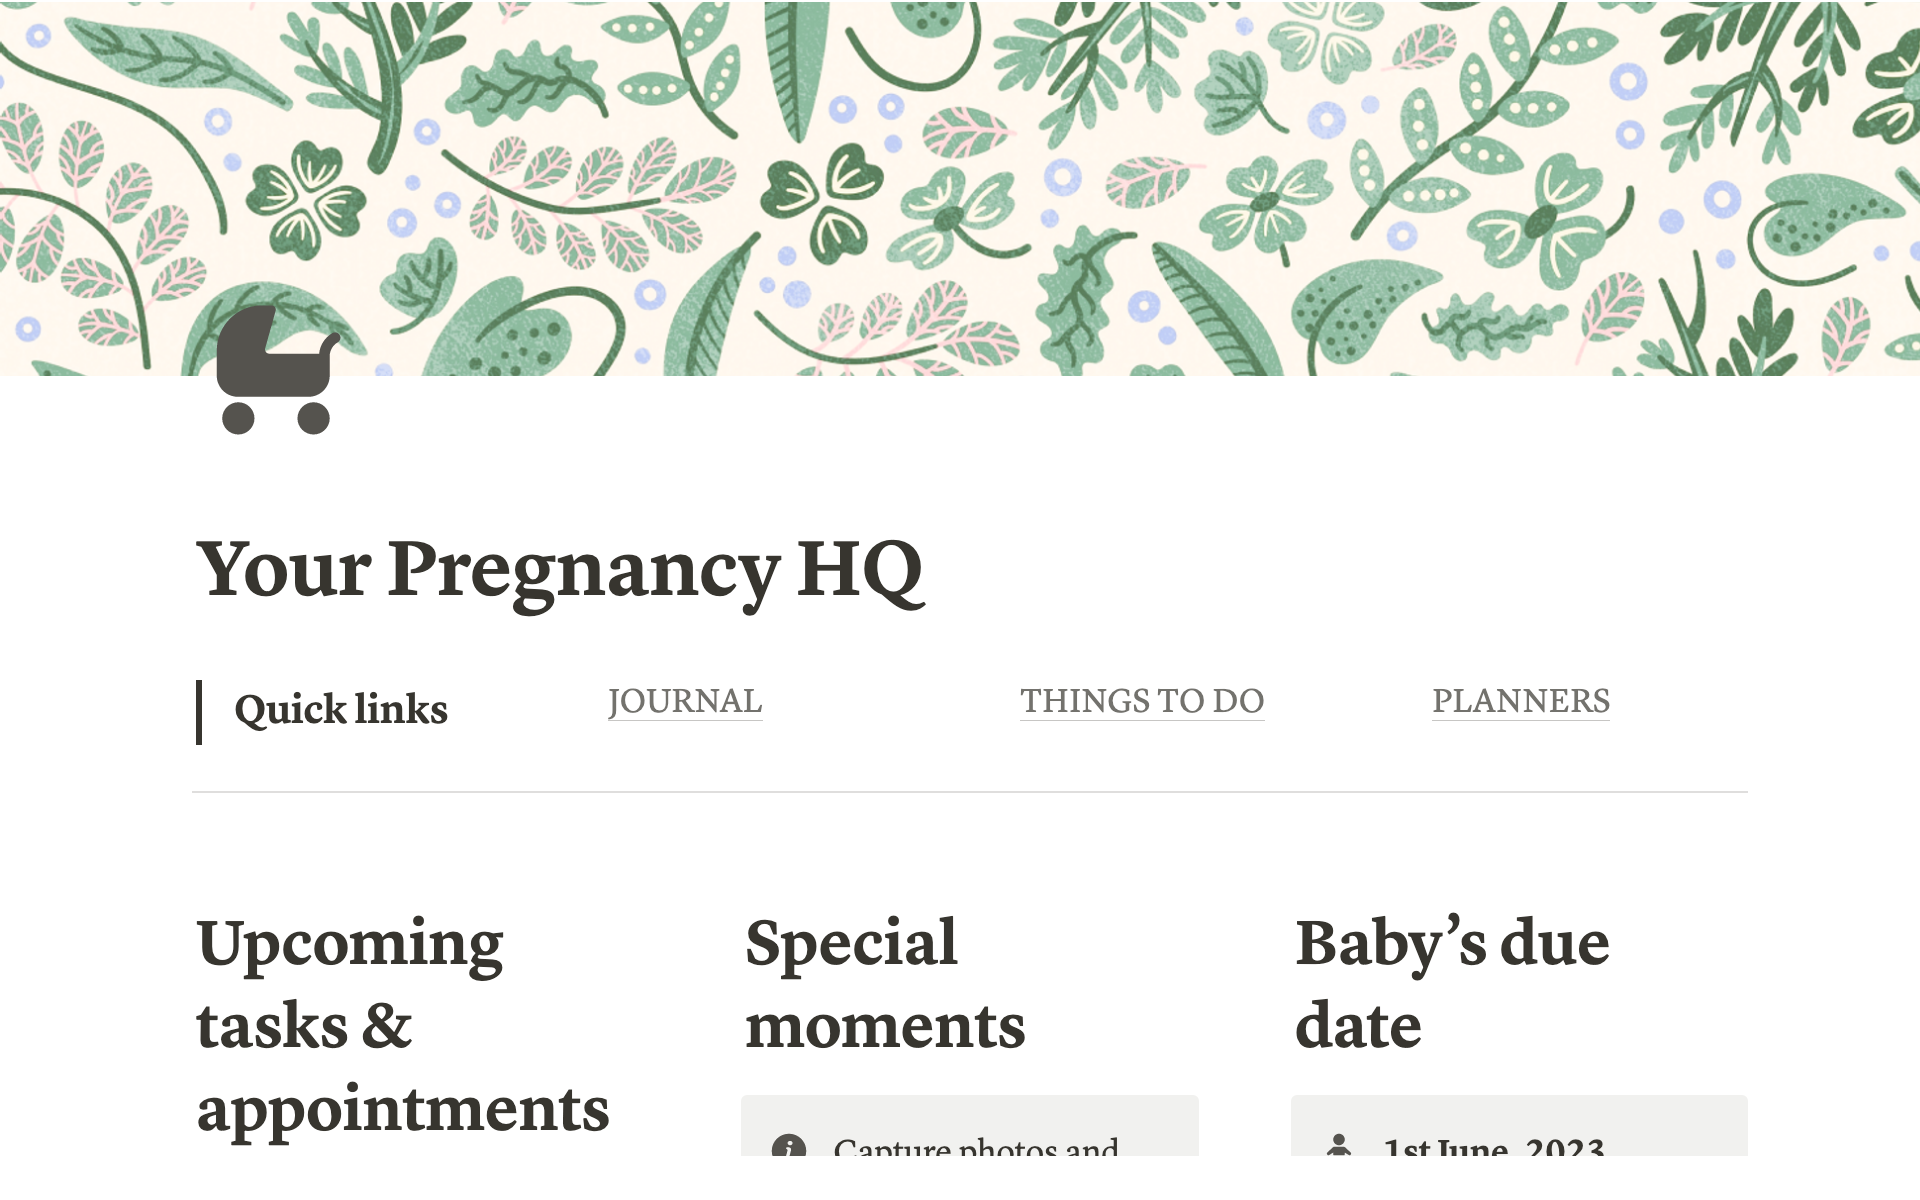 Manage and document your pregnancy journey. With weekly journal reflections, to-do list tracker, and other planners to keep you organised ahead of baby’s arrival.